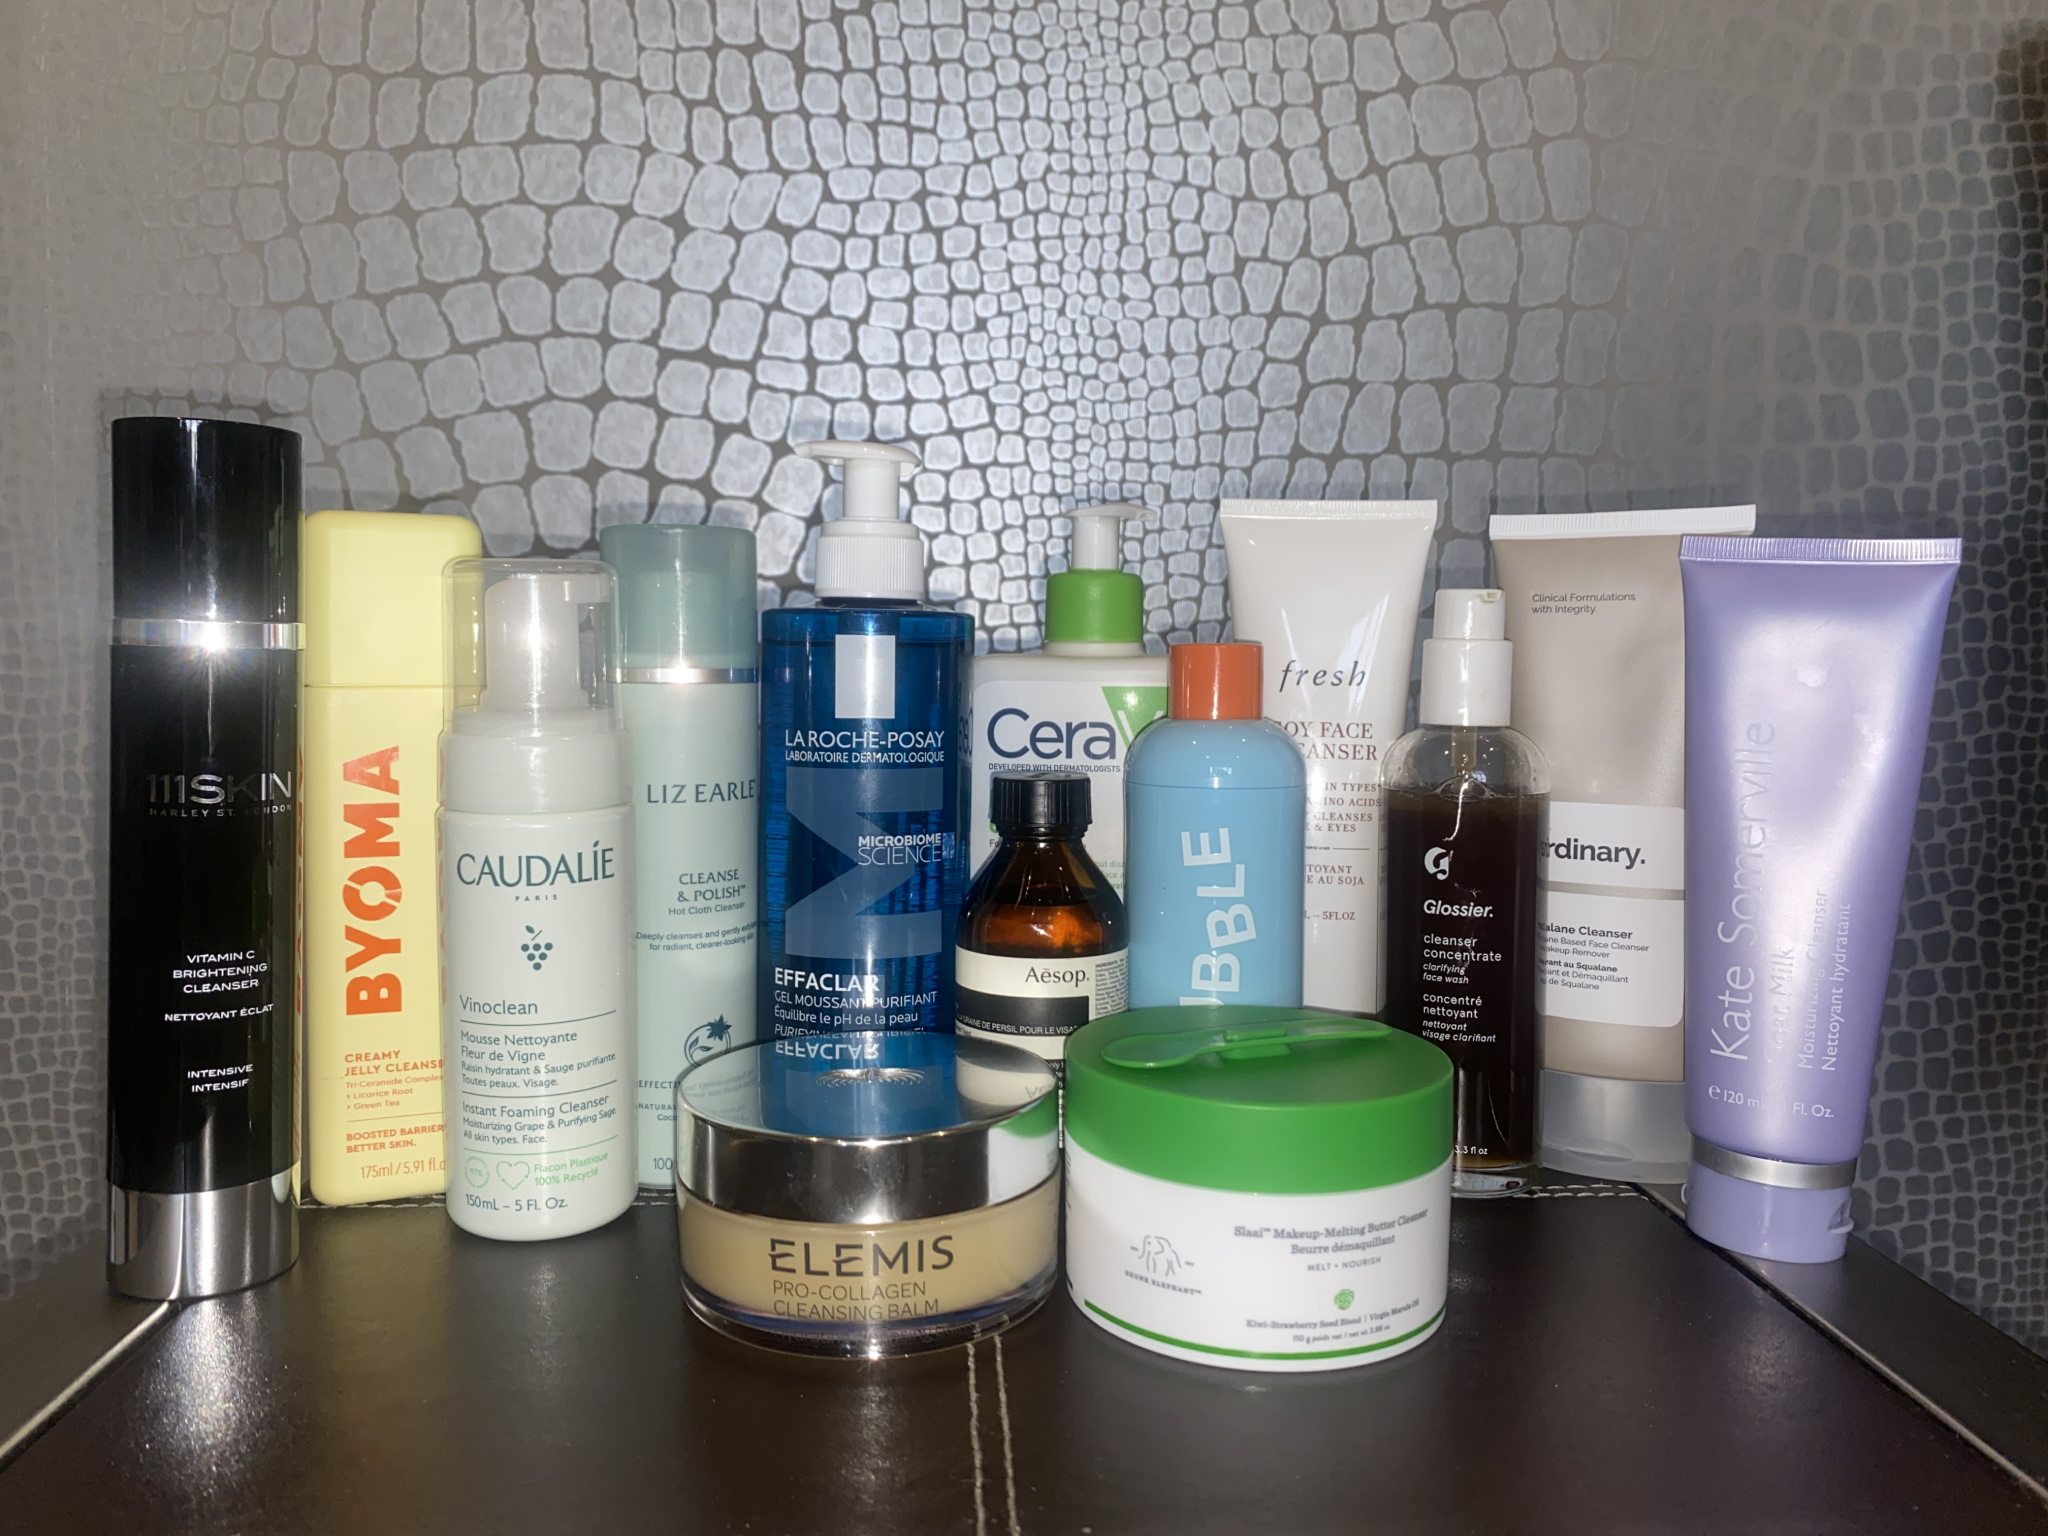 A selection of the facial cleansers we tested